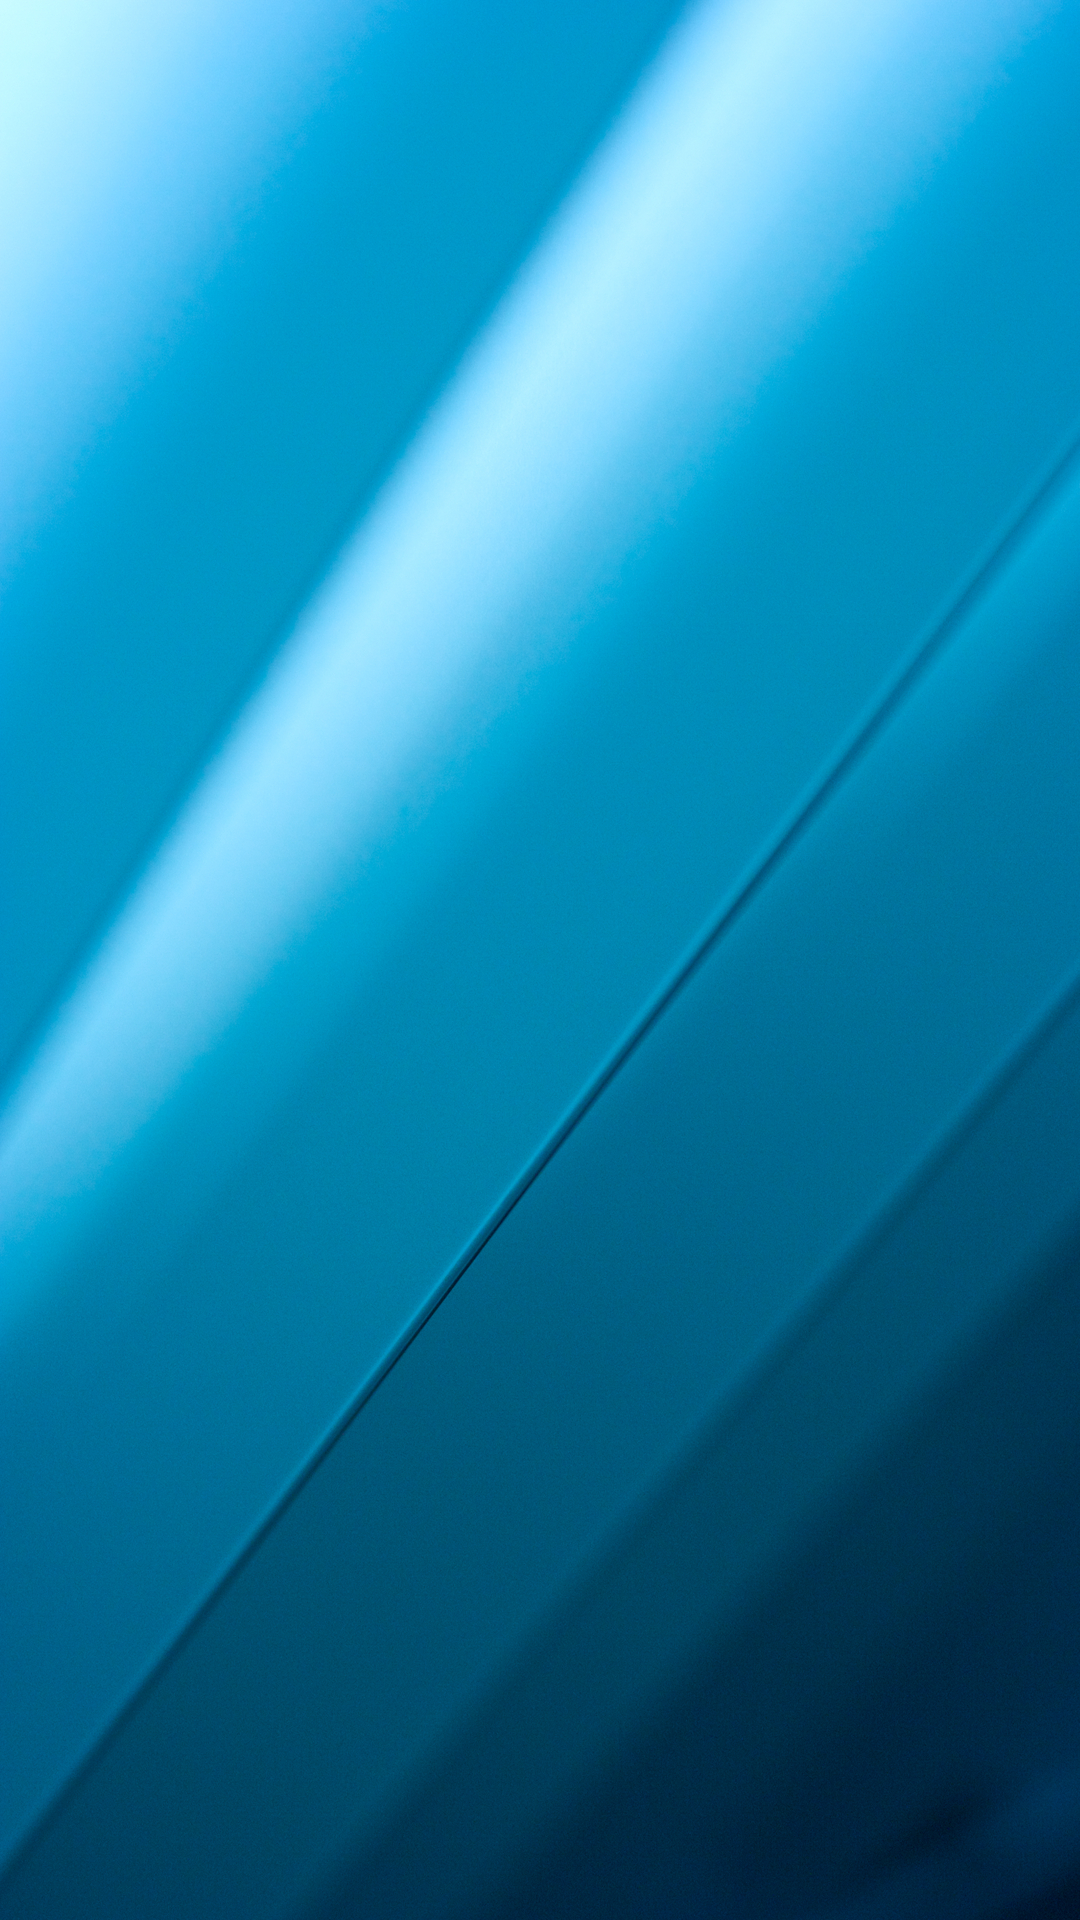 Galaxy S4 Wallpaper With Abstract Blue Design